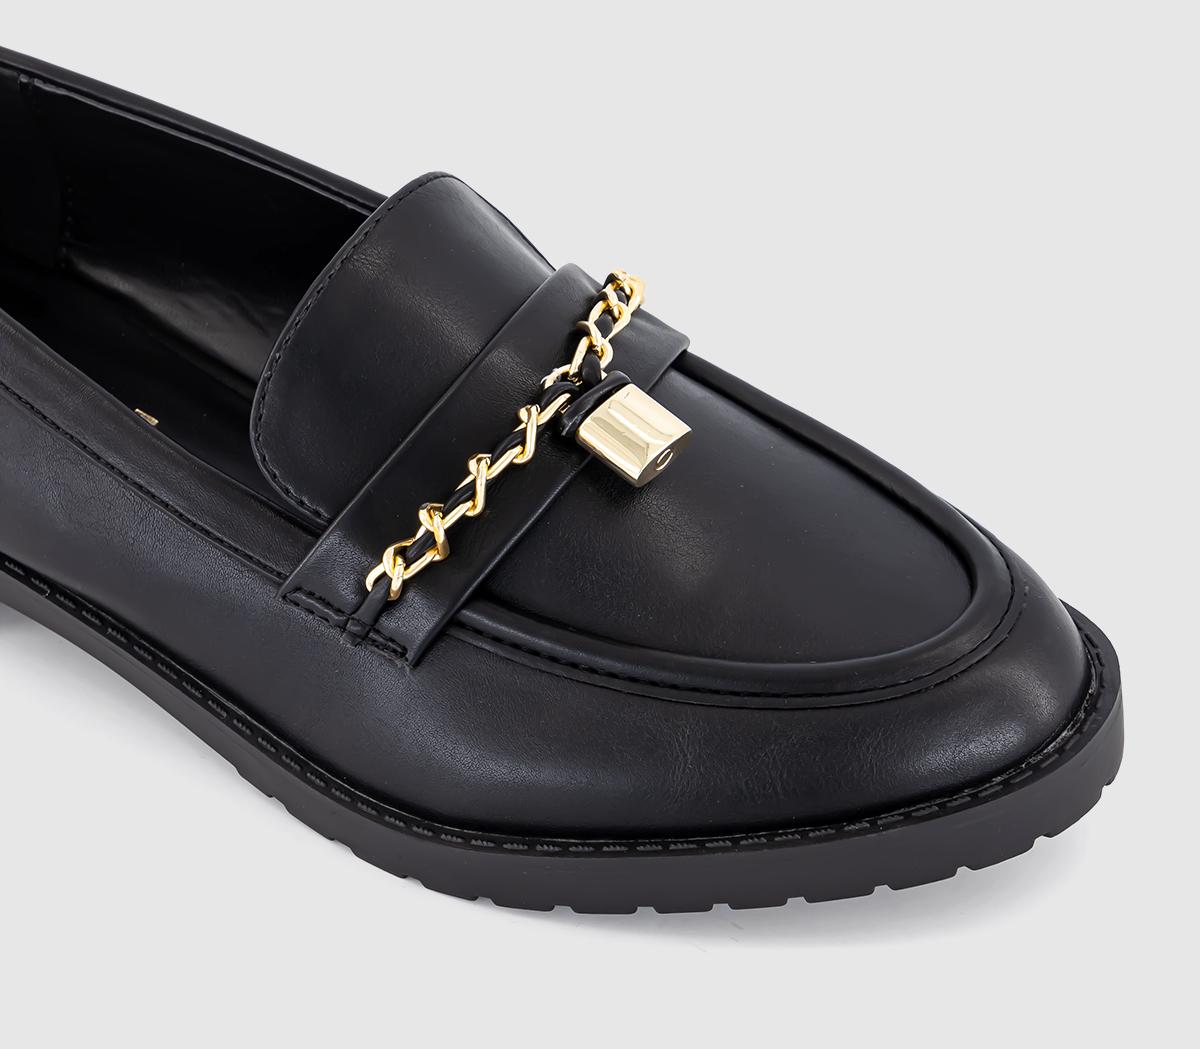 OFFICE Fizz Hardware Penny Loafers Black - Flat Shoes for Women